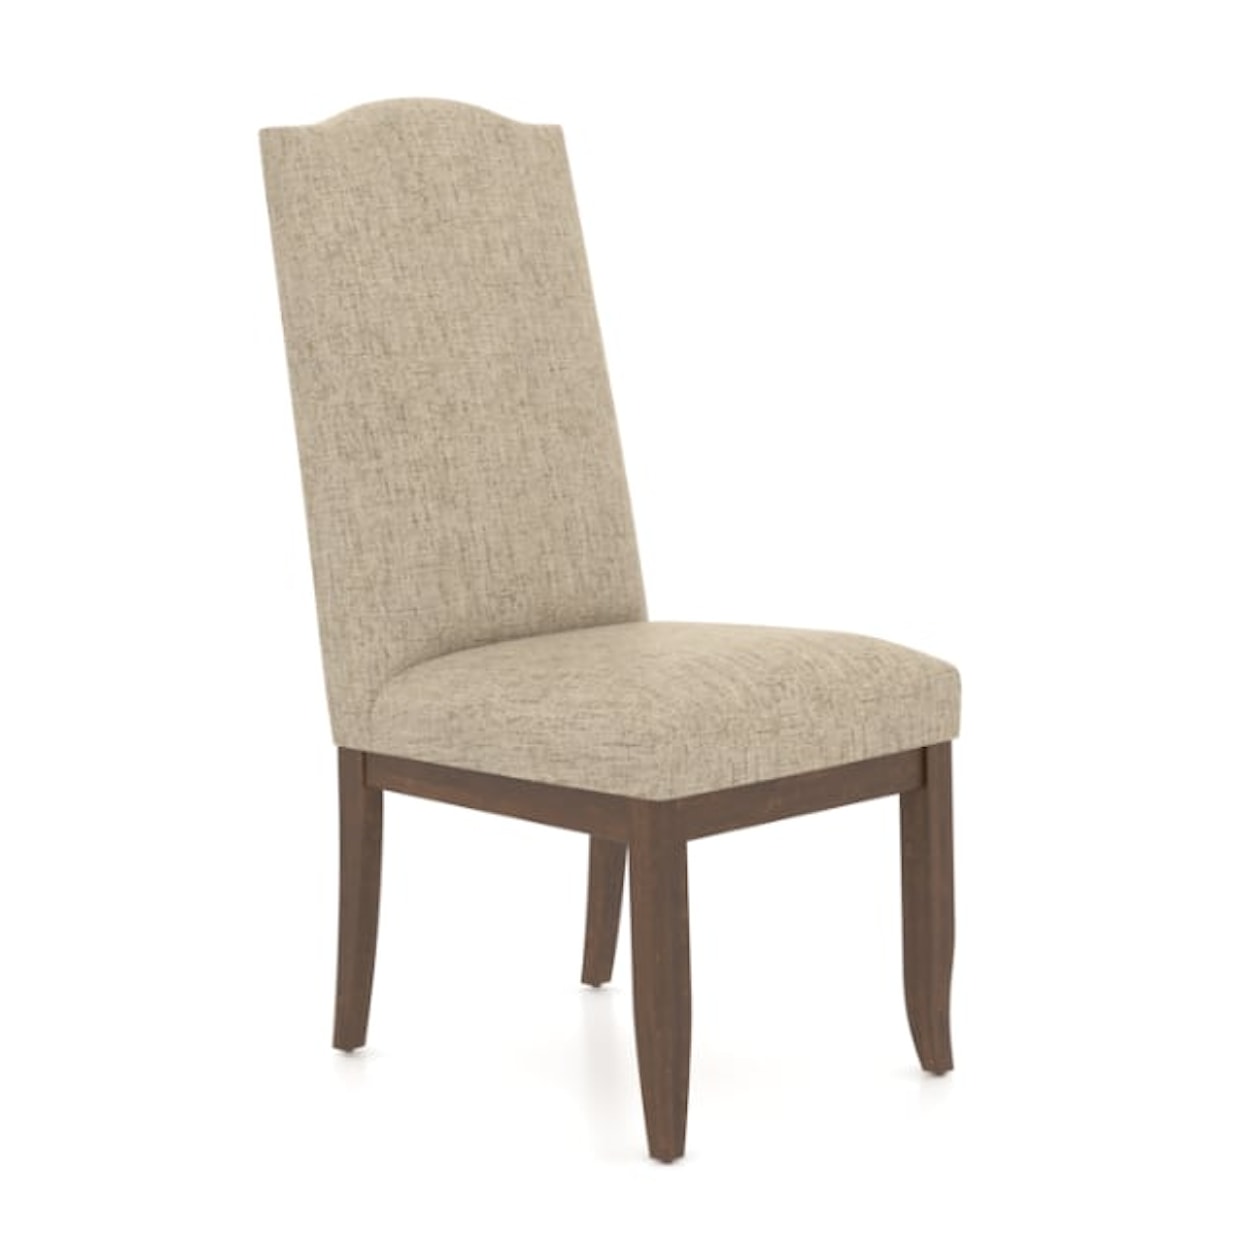 Canadel Canadel Customizable Upholstered Side Chair